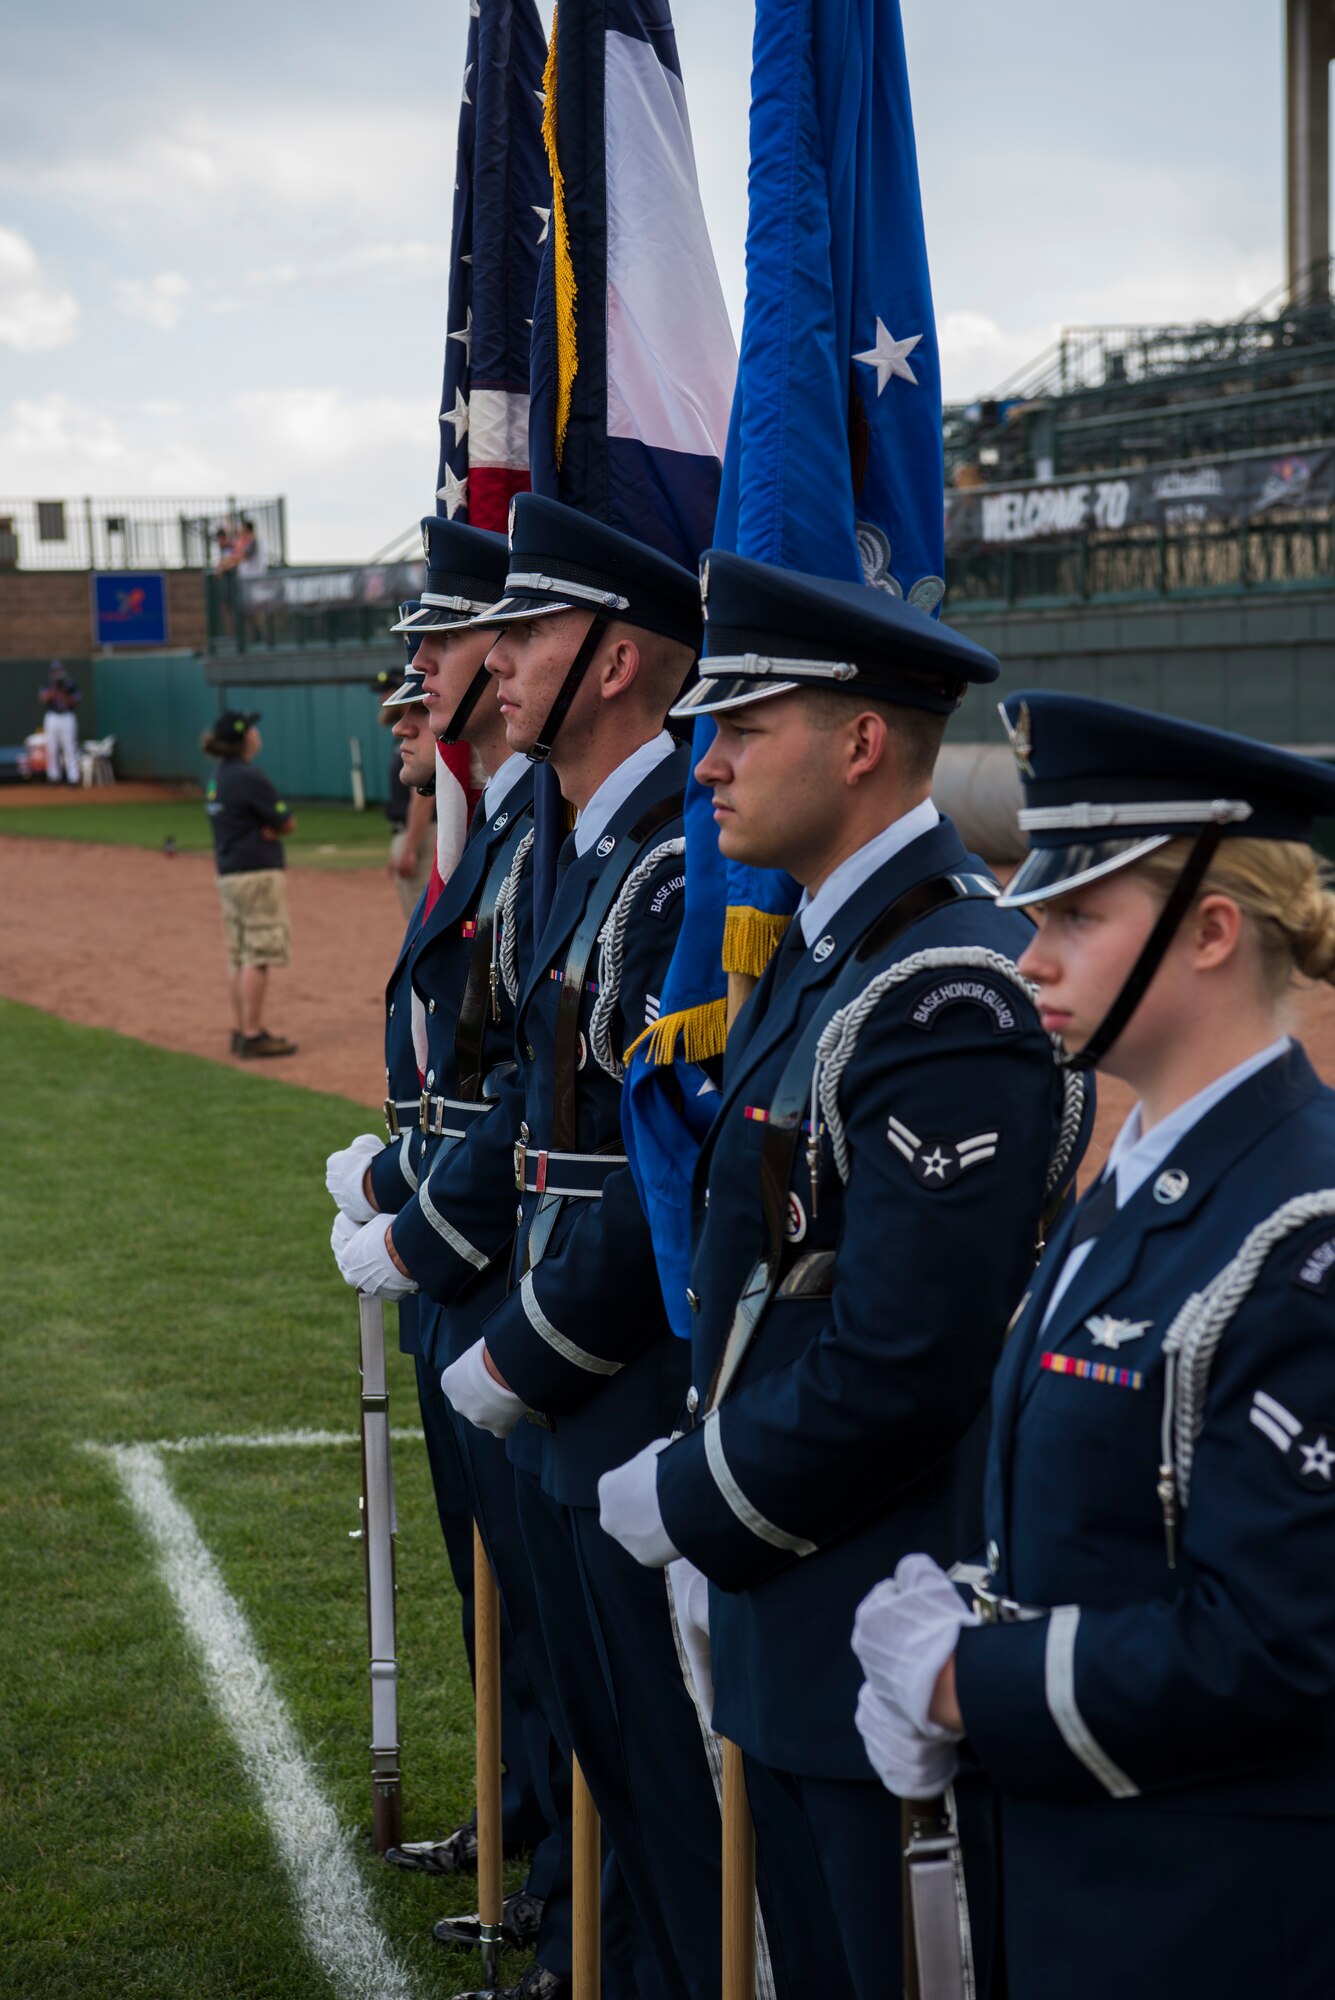 High Frontier Honor Guard members stand at ceremonial parade rest prior to posting the colors for the National Anthem at a Rocky Mountain Vibes game in Colorado Springs, Colorado, June 27, 2019. During Military Appreciation Night, military personnel were honored for their service to the United States. (U.S. Air Force photo by Airman 1st Class Jonathan Whitely)